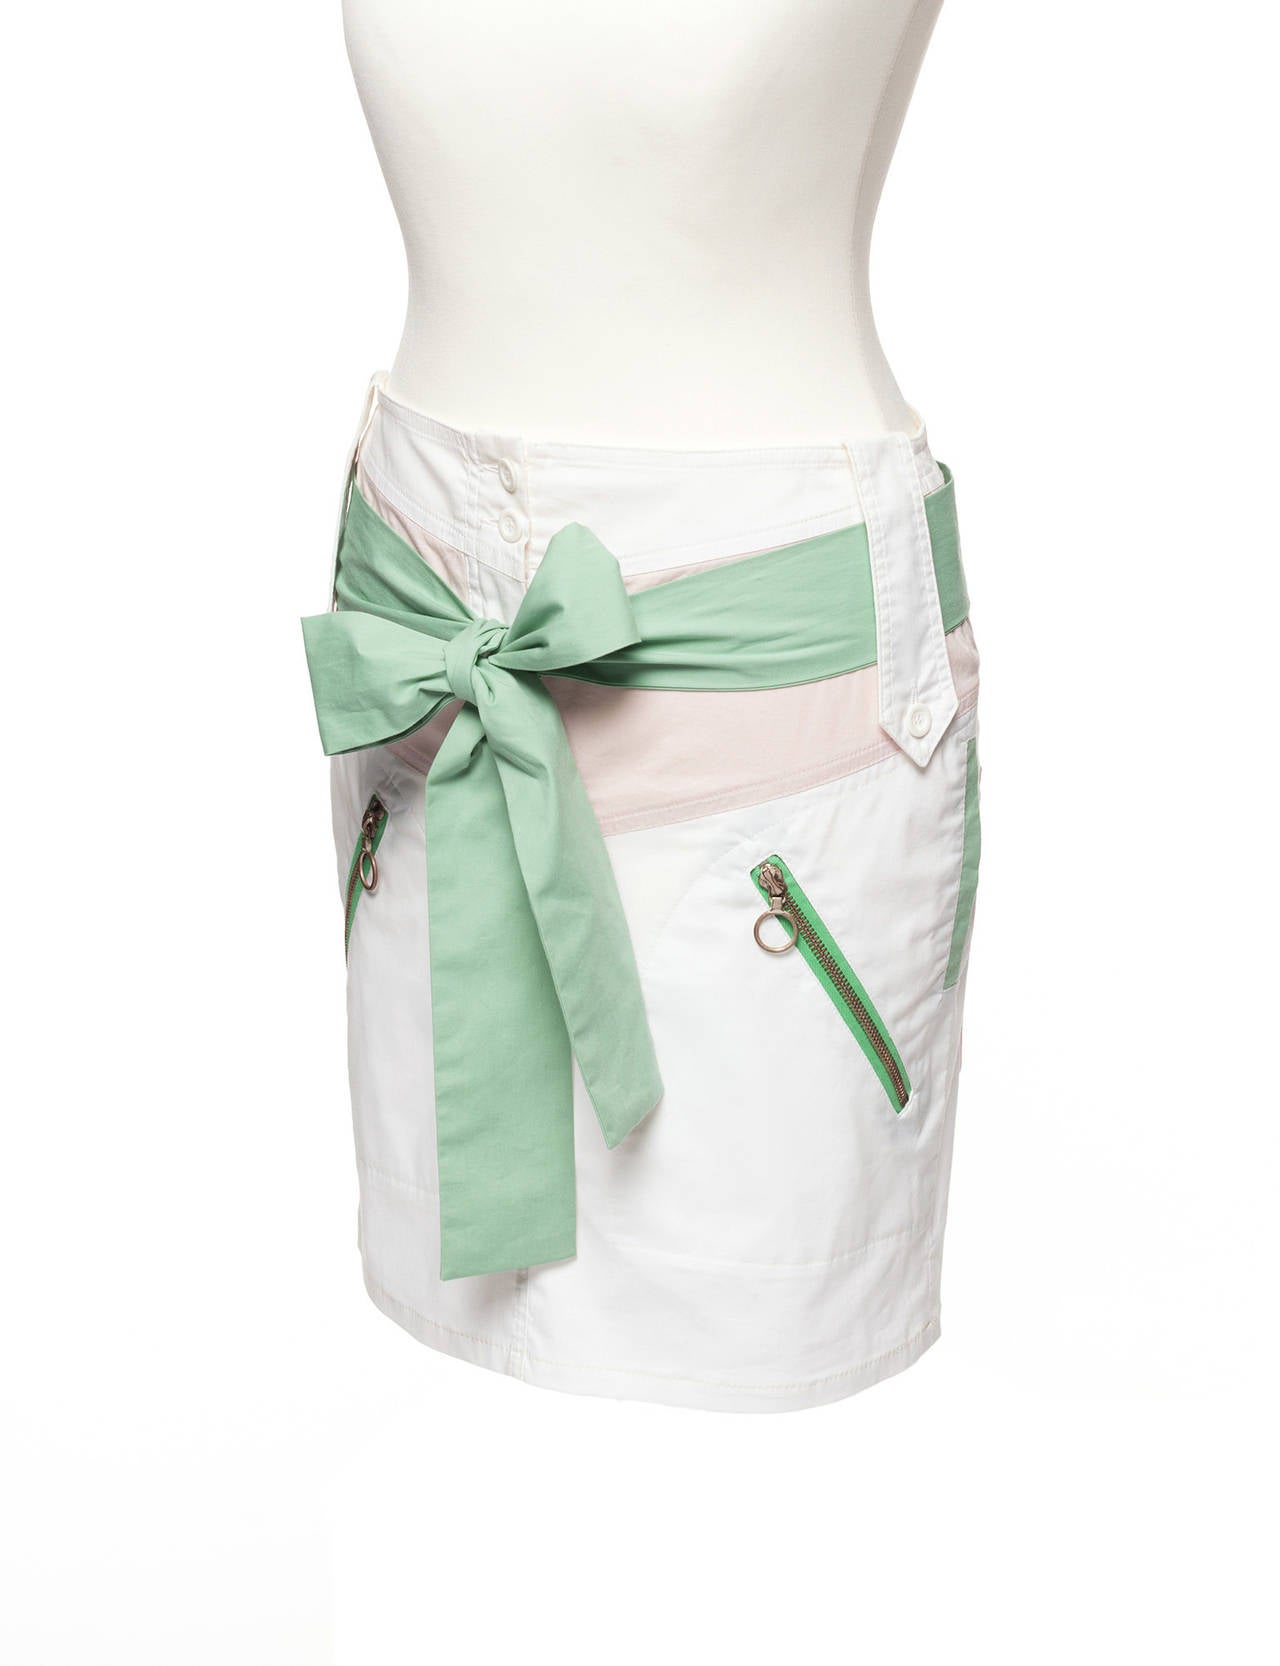 Skirt has multiple color blocked details in pastel tones (mint and rose), long waist sash, side pocket zippers, paperbag style waist. This is a runway sample. US 8, EU 36